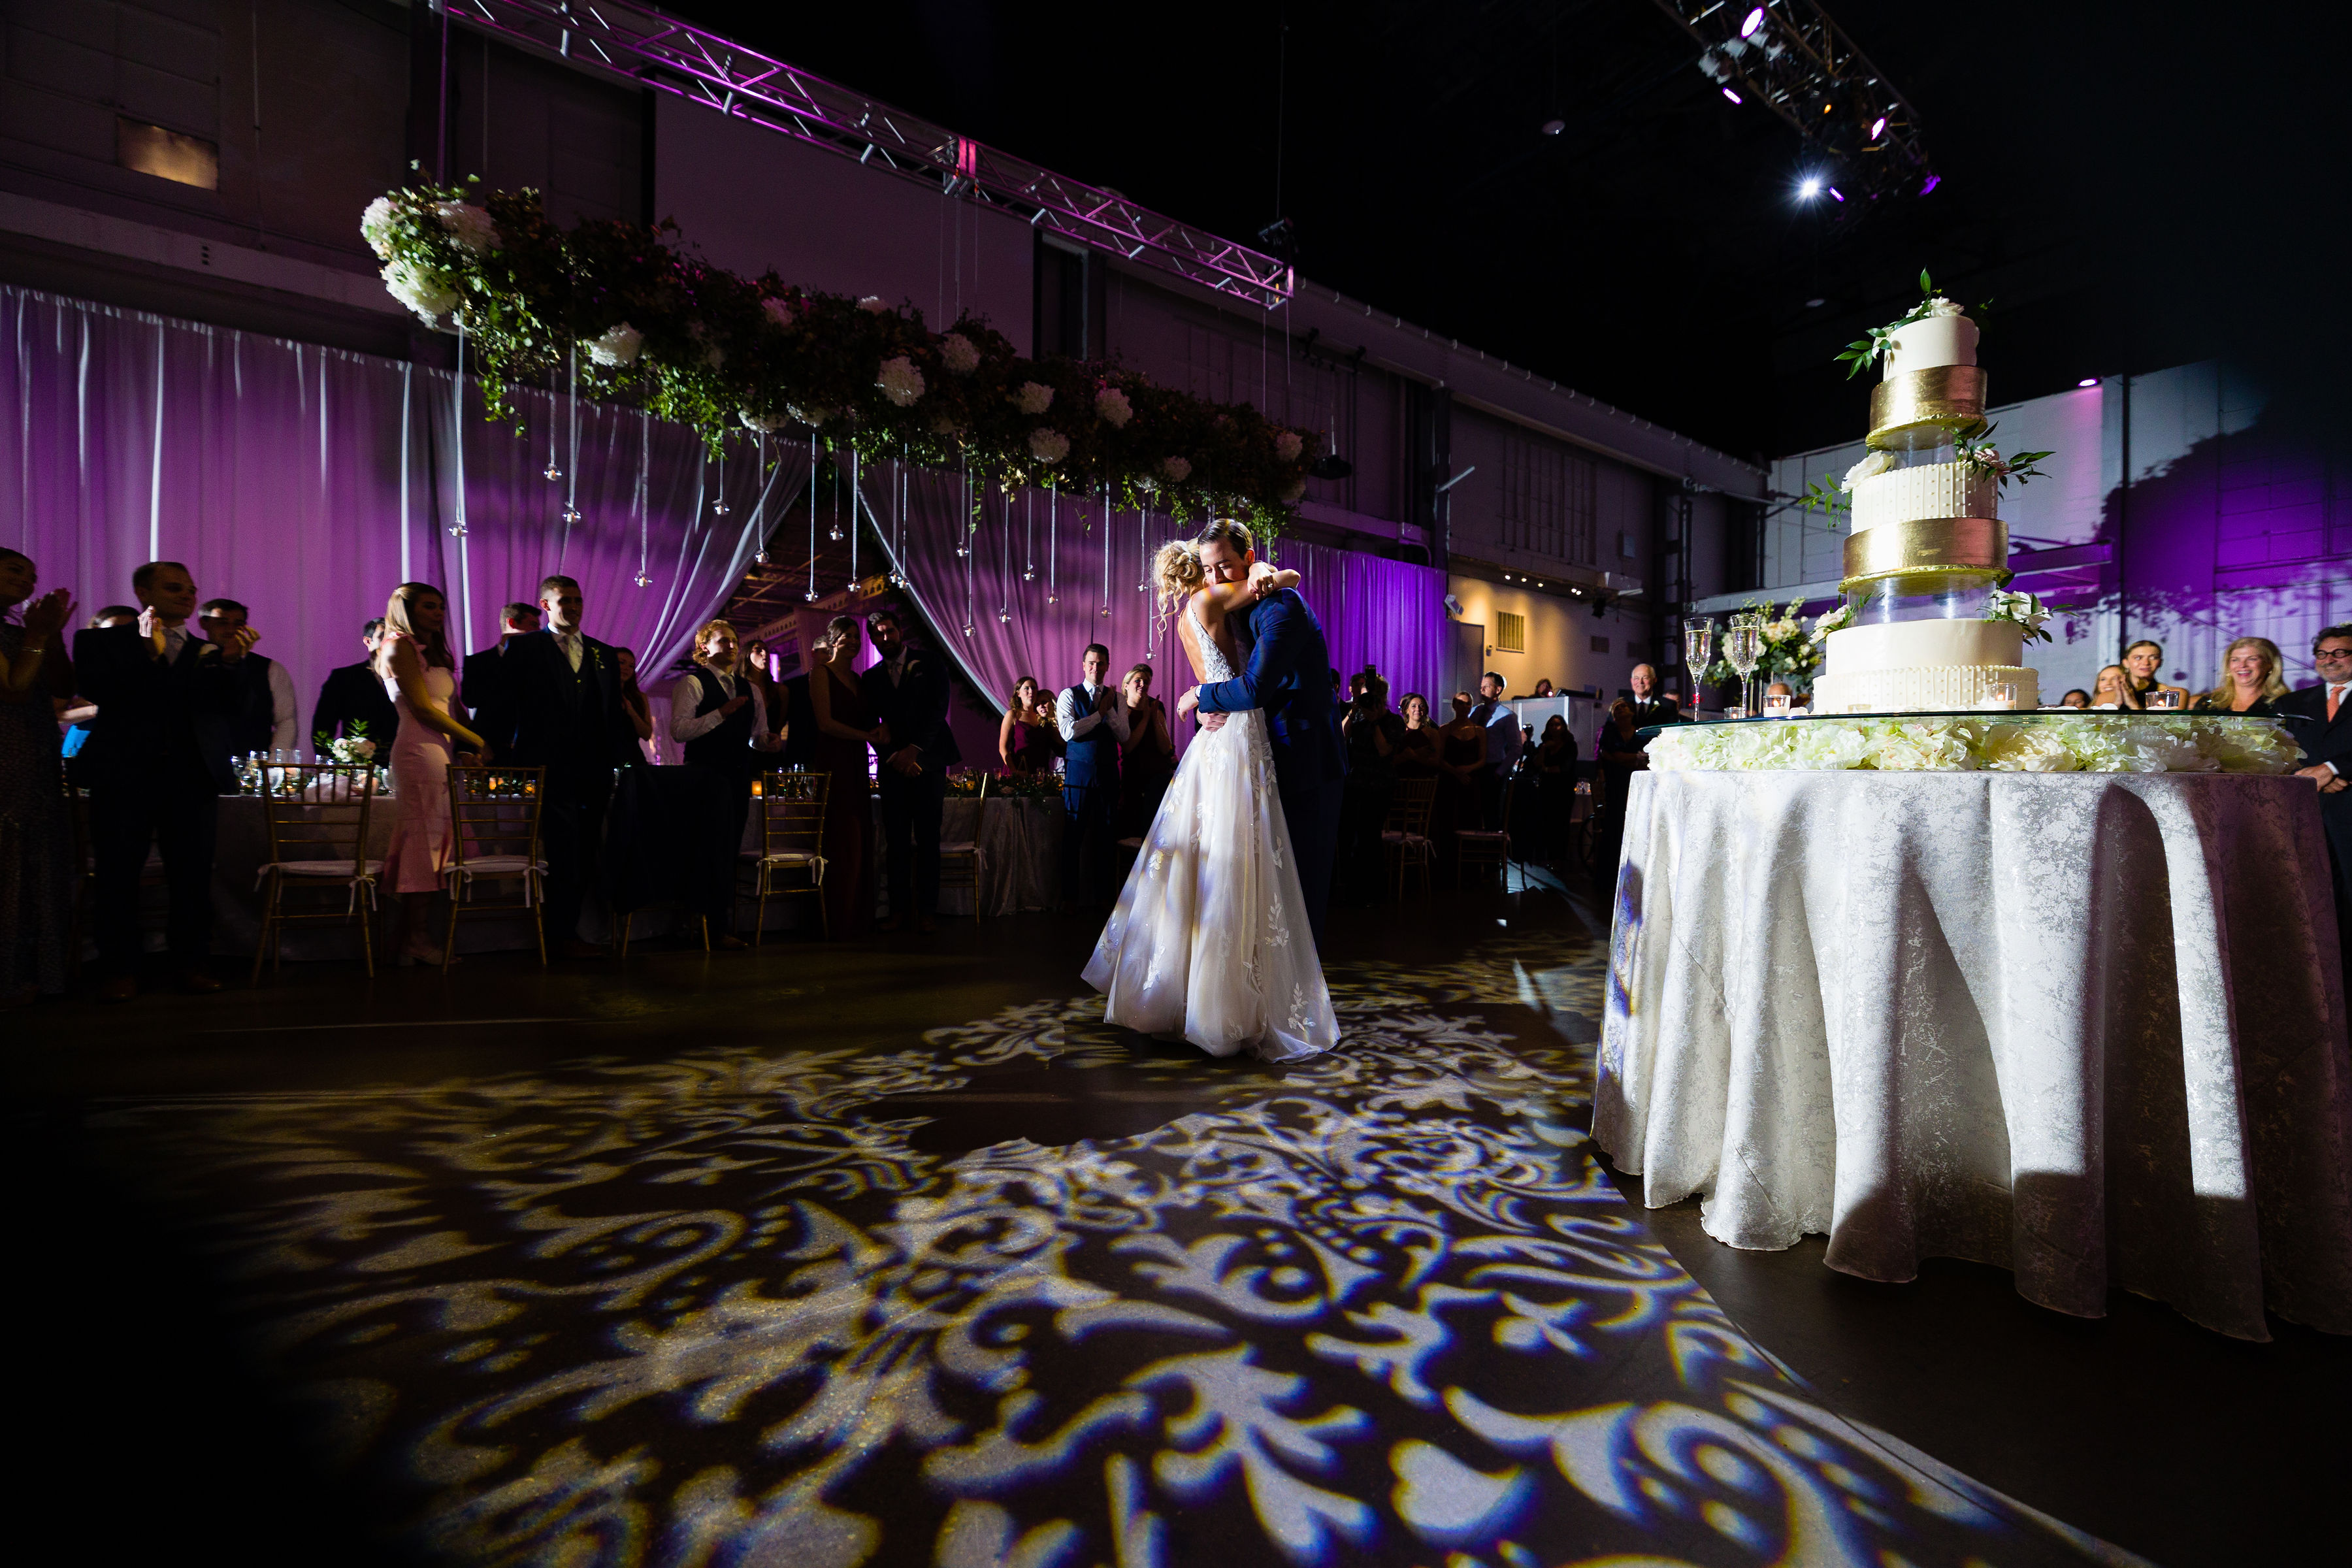 End of First Dance